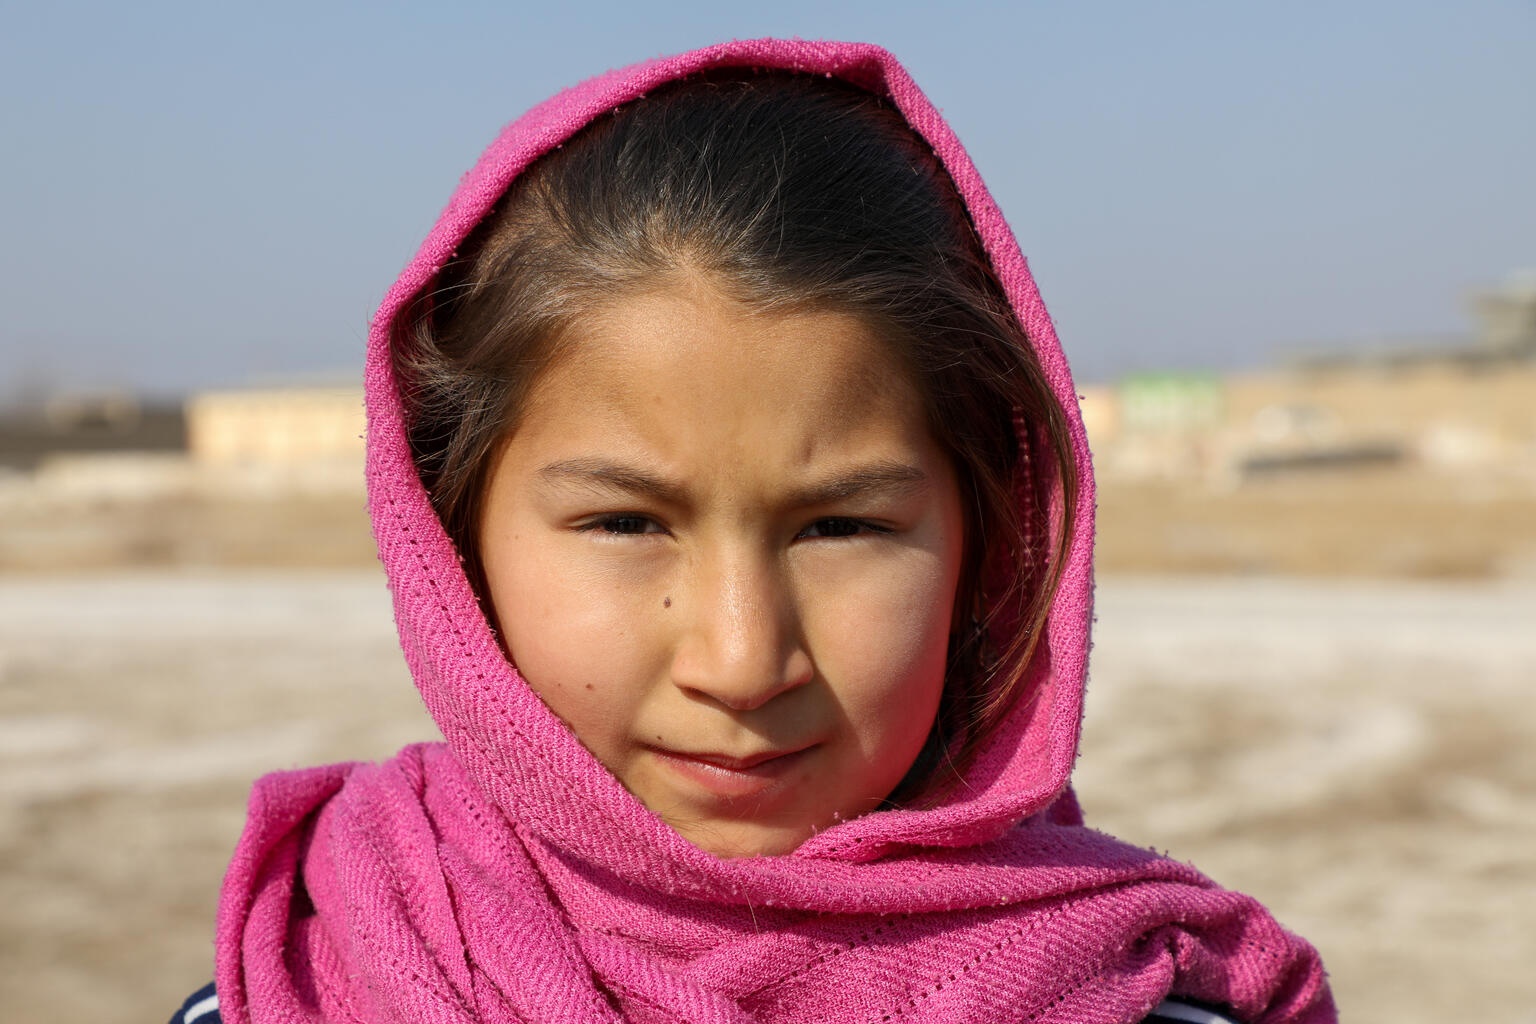 A 13-year-old girl is pictured in Afghanistan.